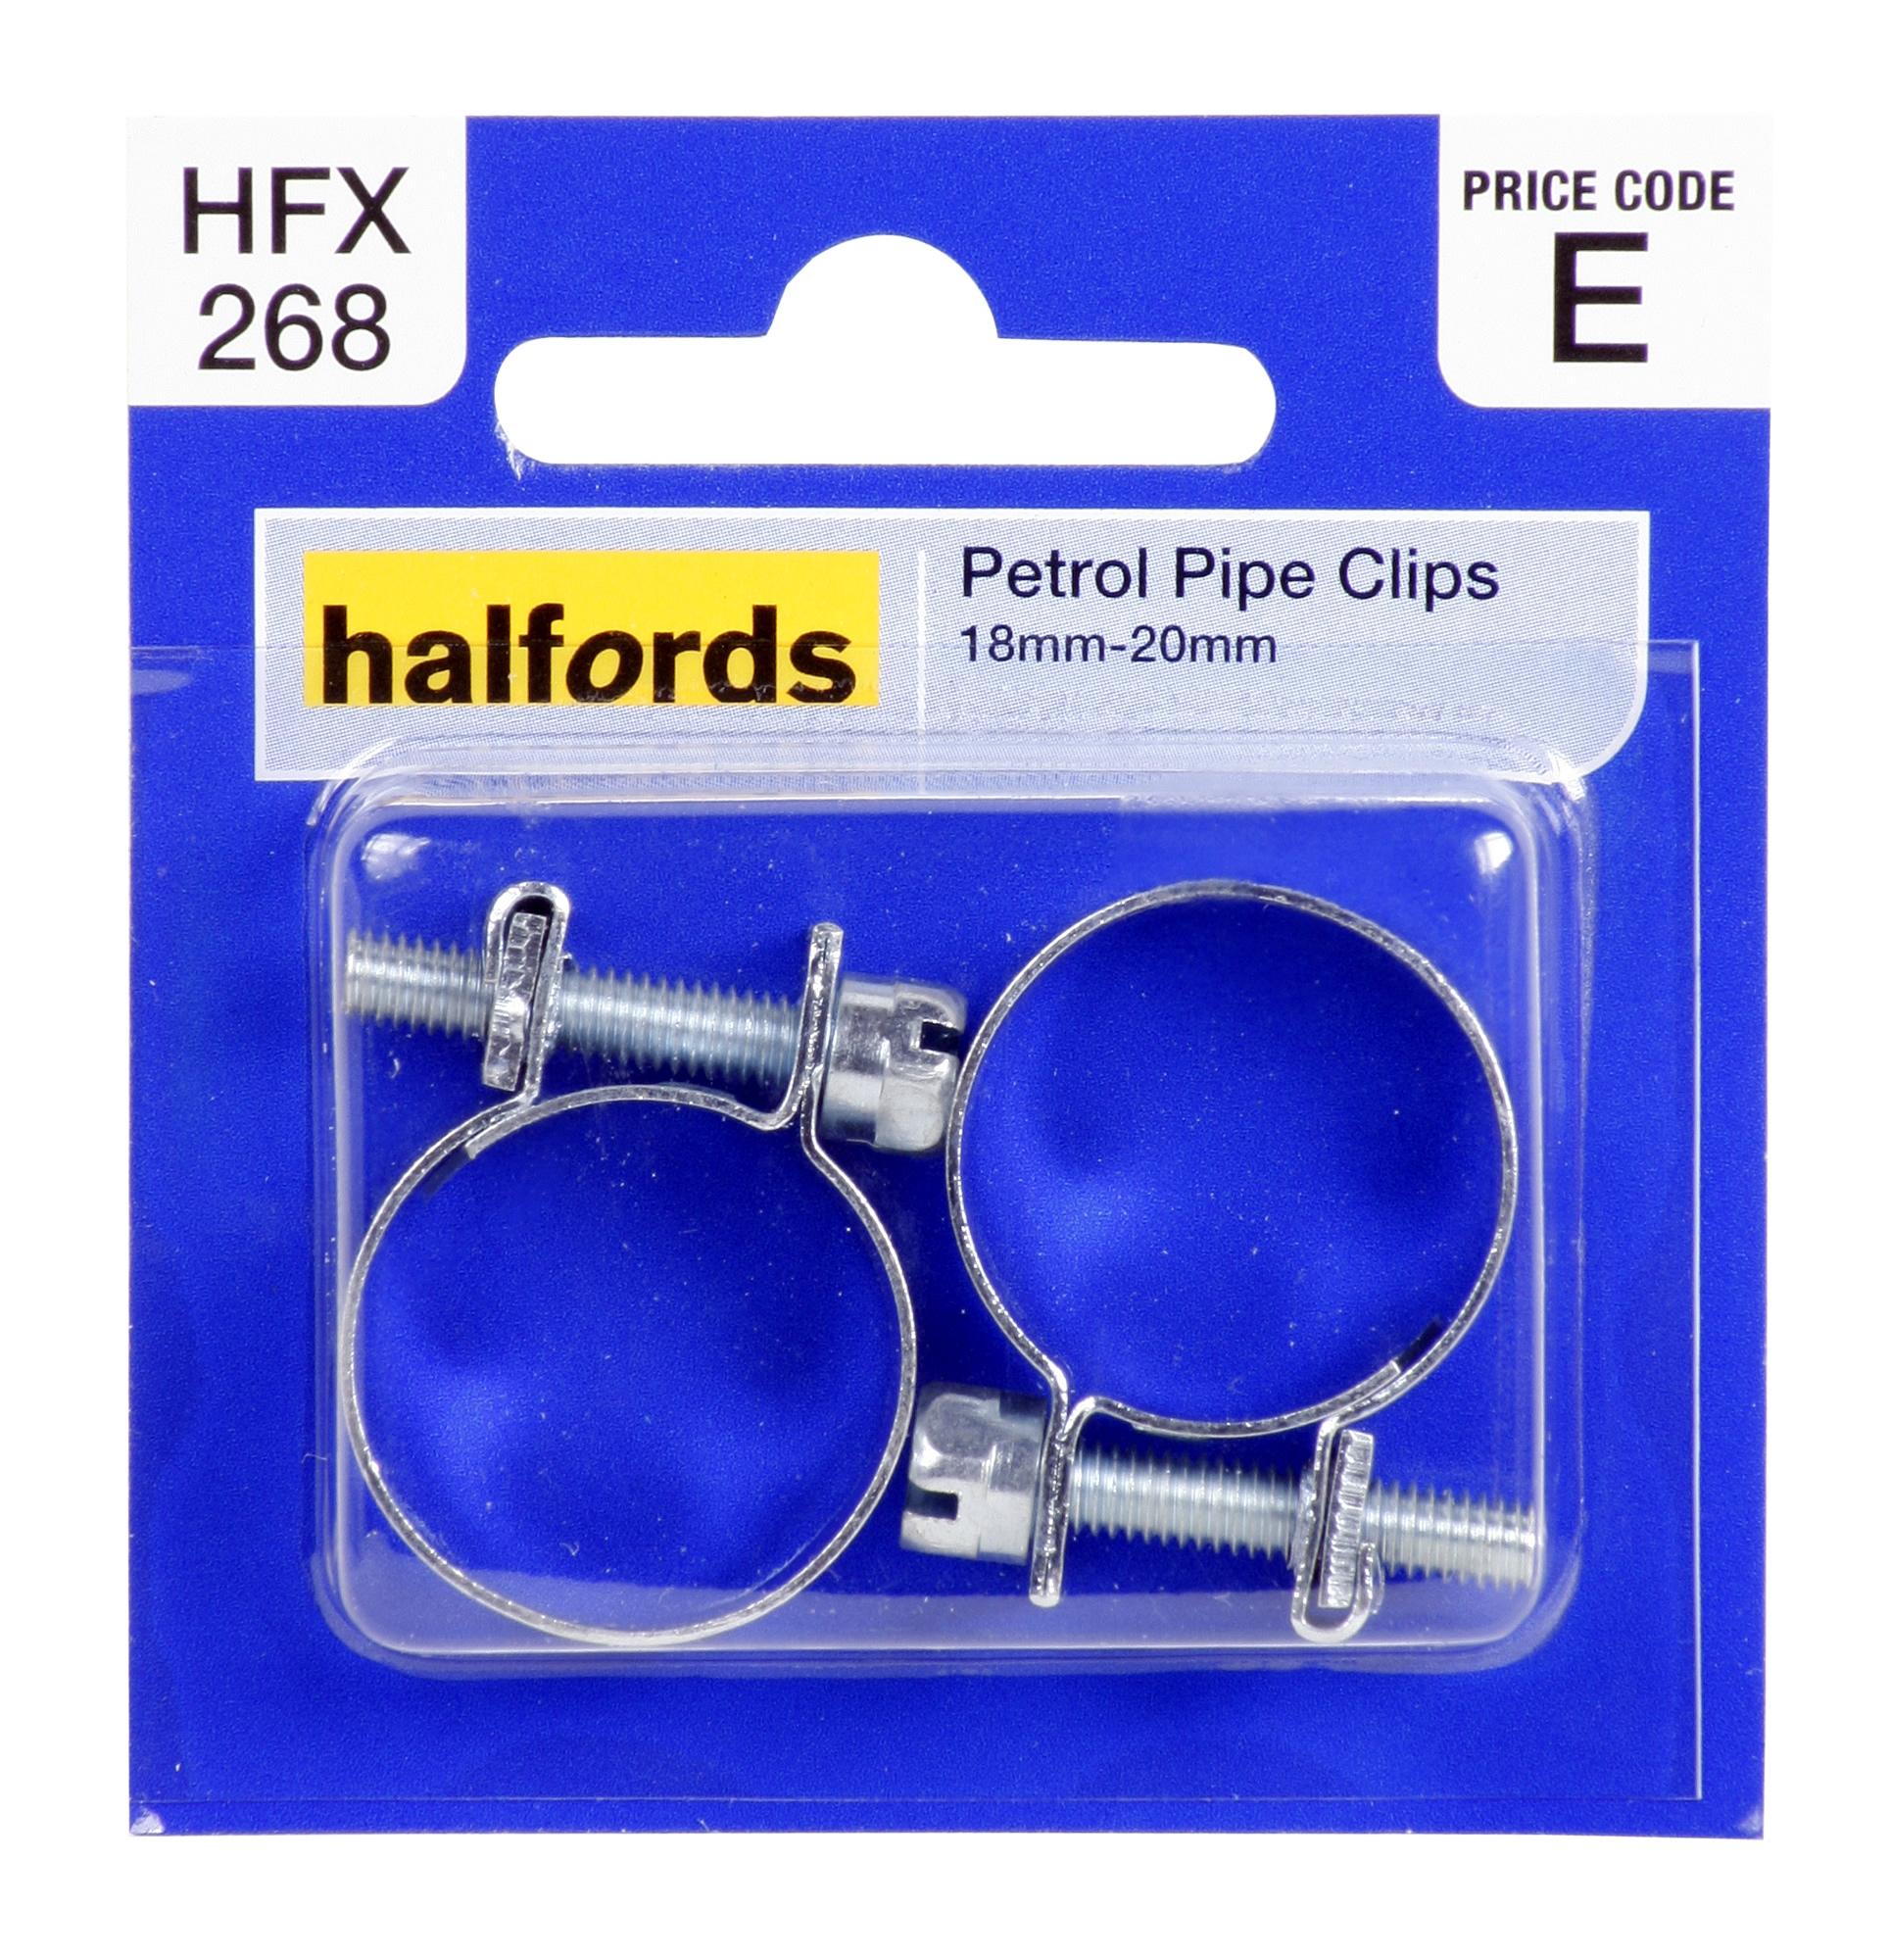 Halfords Petrol Pipe Clips Hfx 268